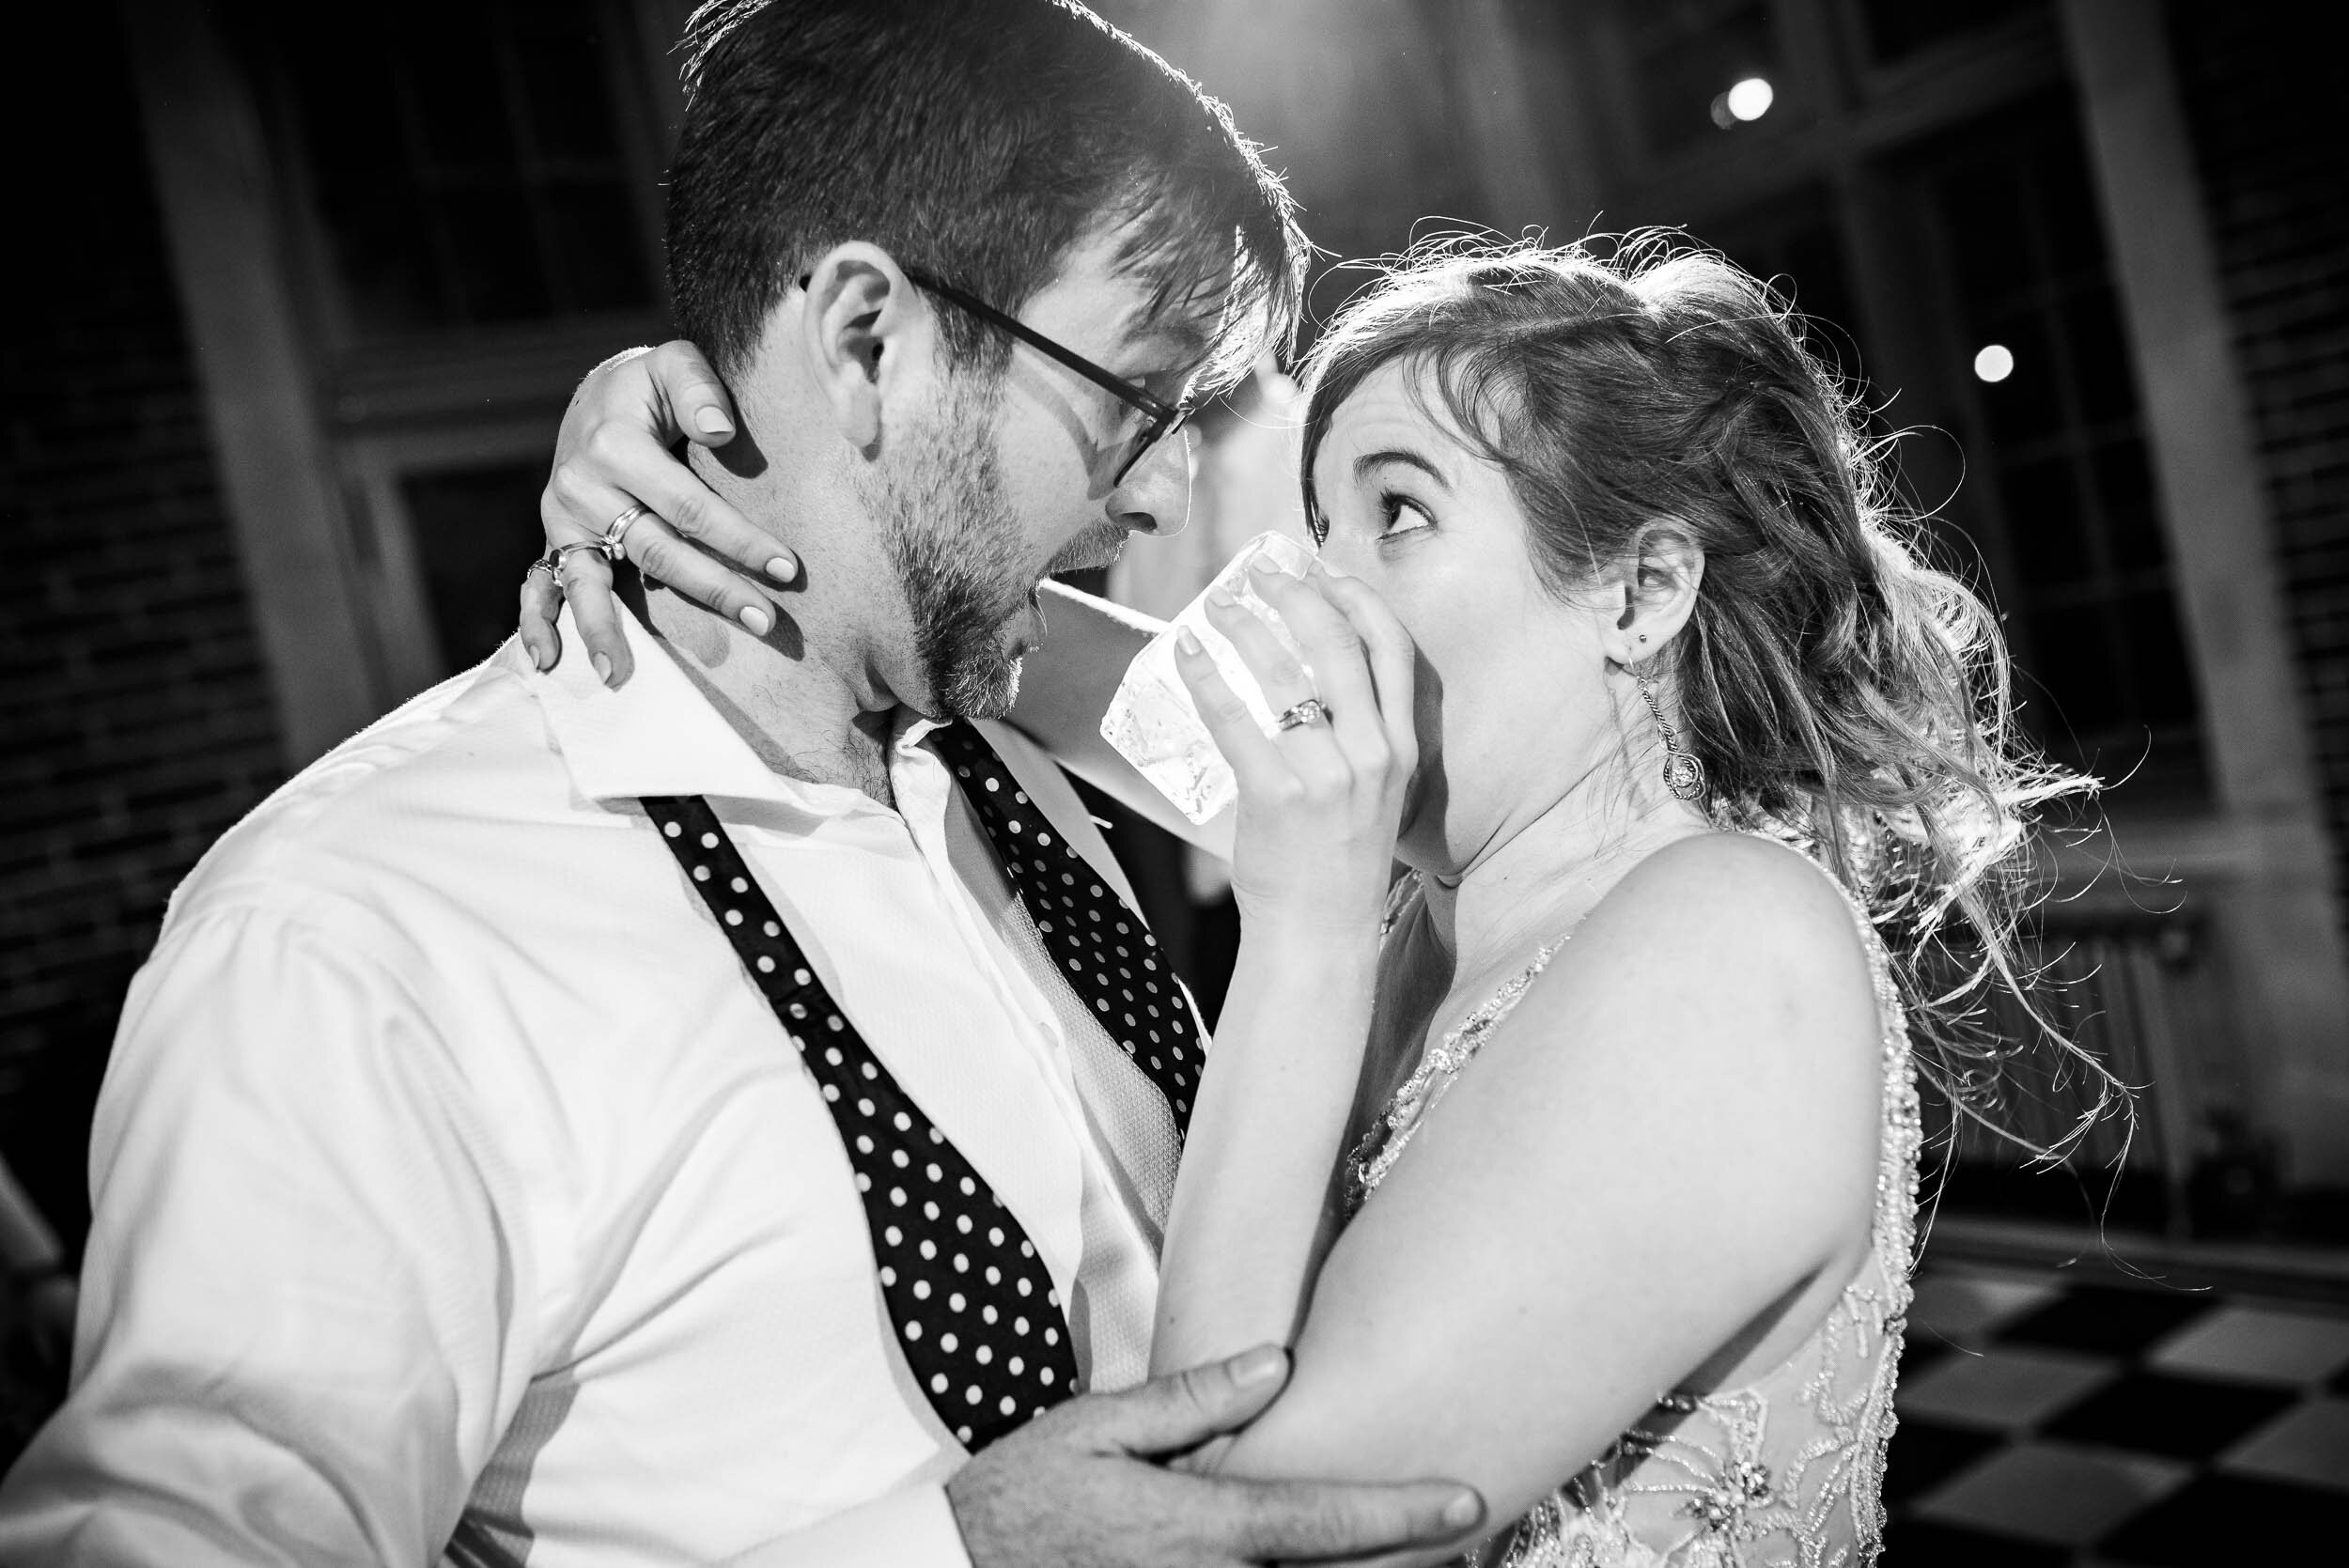 Funny photo of bride and groom on the dance floor: Columbus Park Refectory Chicago wedding captured by J. Brown Photography.